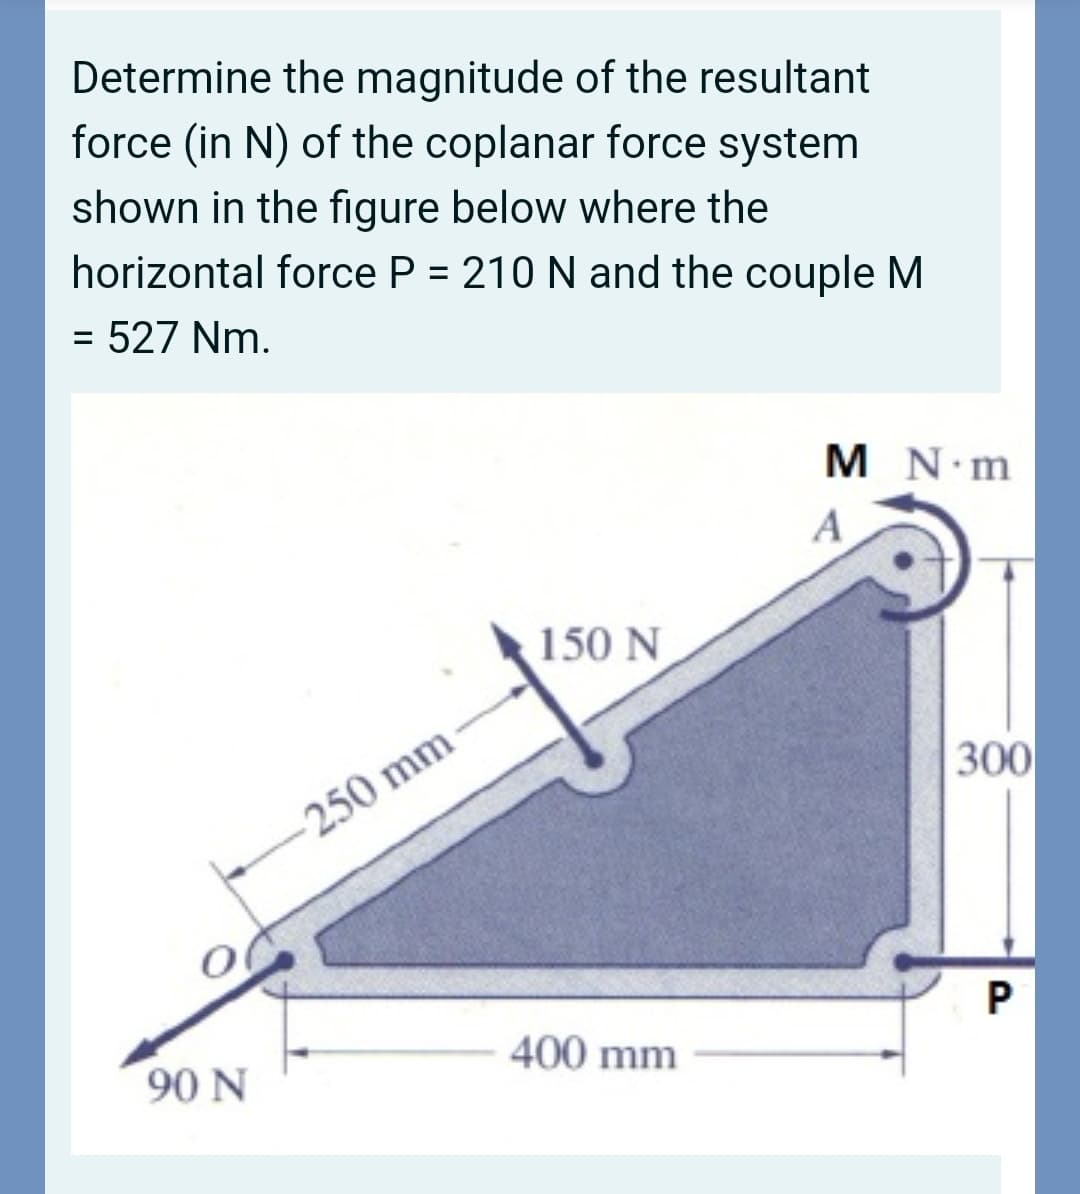 Determine the magnitude of the resultant
force (in N) of the coplanar force system
shown in the figure below where the
horizontal force P = 210 N and the couple M
%D
= 527 Nm.
%3D
M N m
A
150 N
300
250 mm
90 N
400 mm
P.
